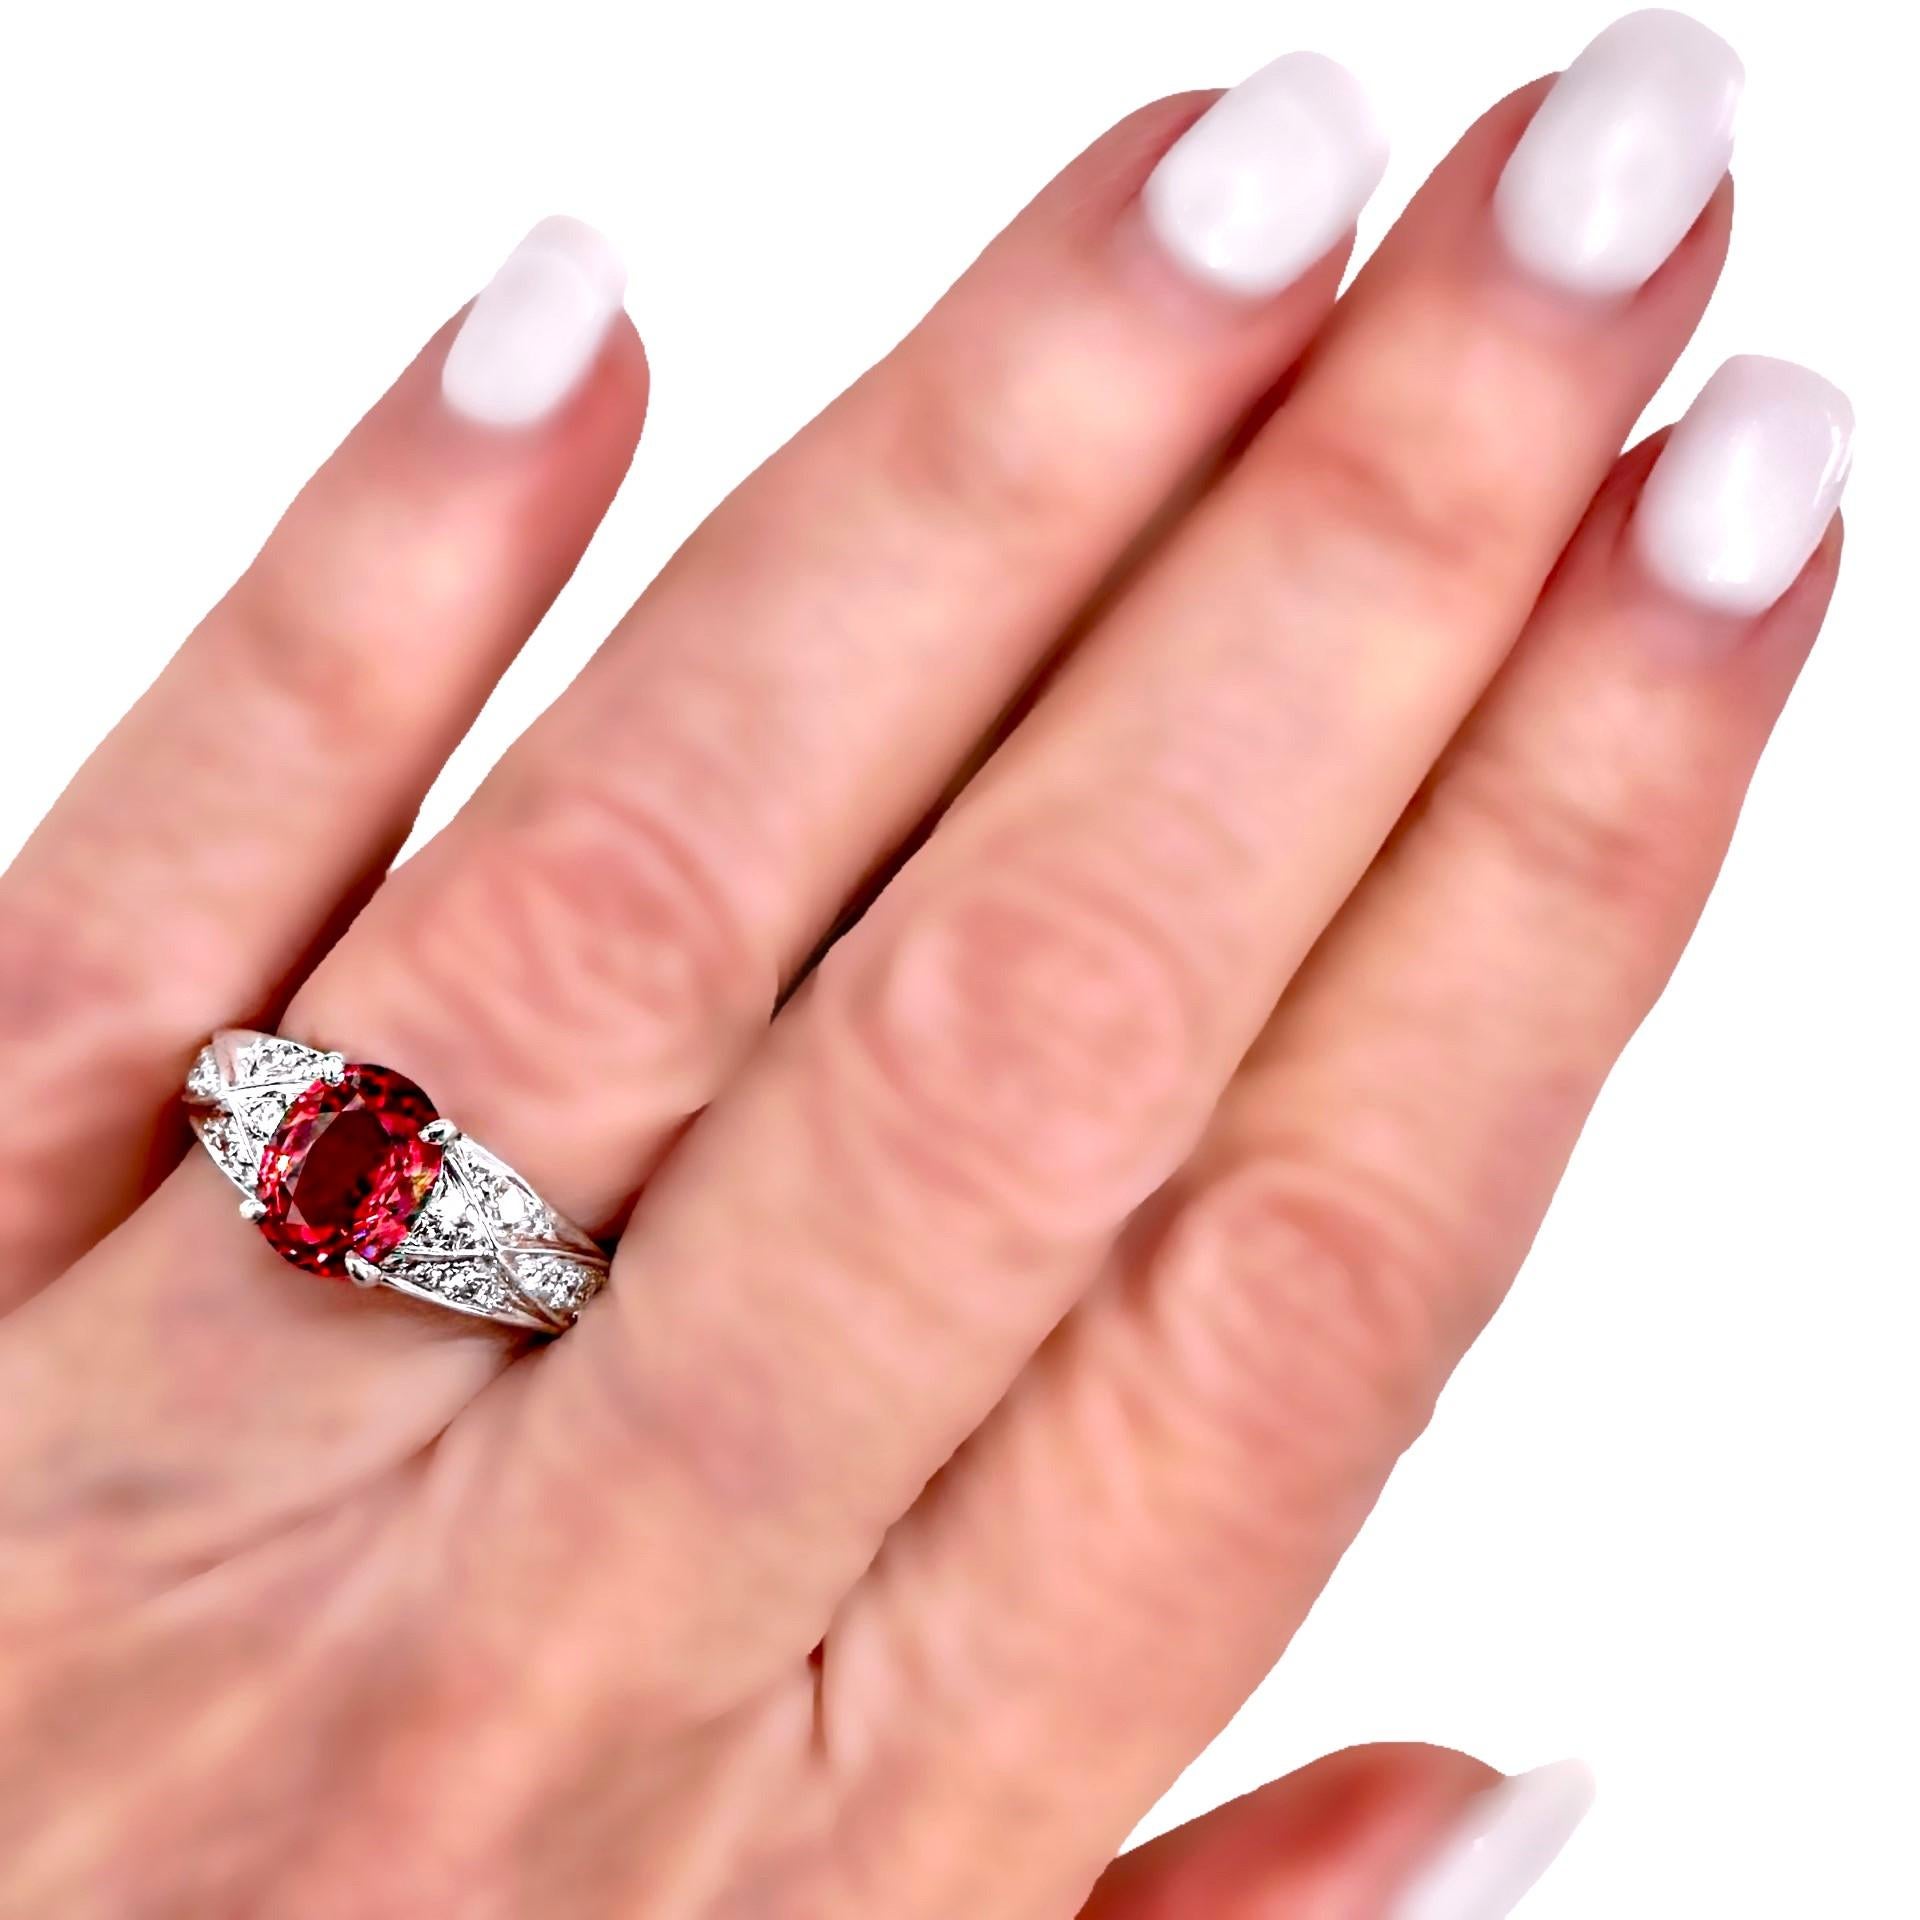 Vivid Oval Shaped Orangy-Red Burmese Spinel set in Platinum Ring with Diamonds 7